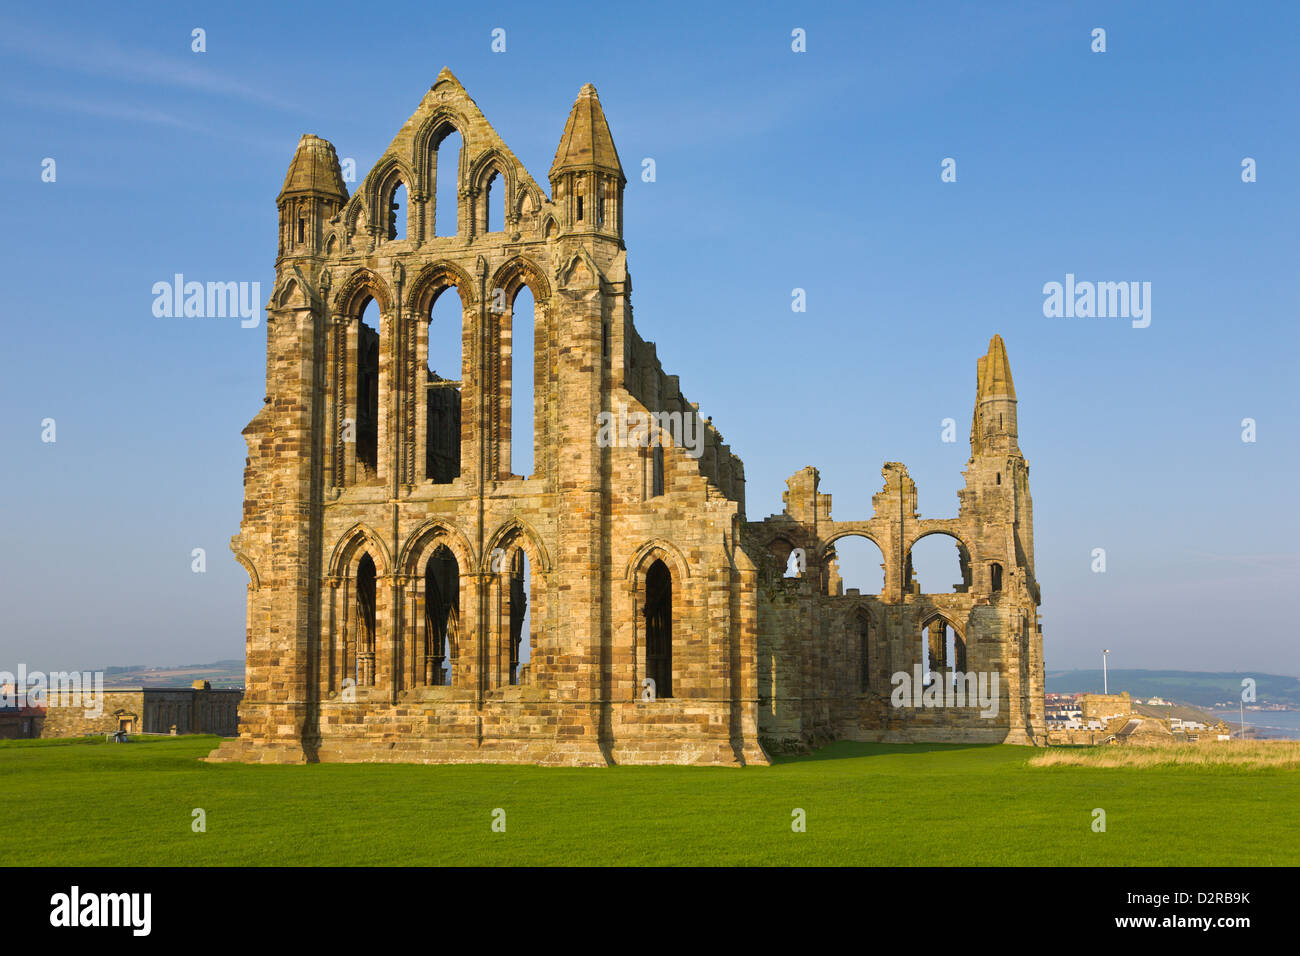 L'Abbaye de Whitby, North Yorkshire Angleterre Banque D'Images